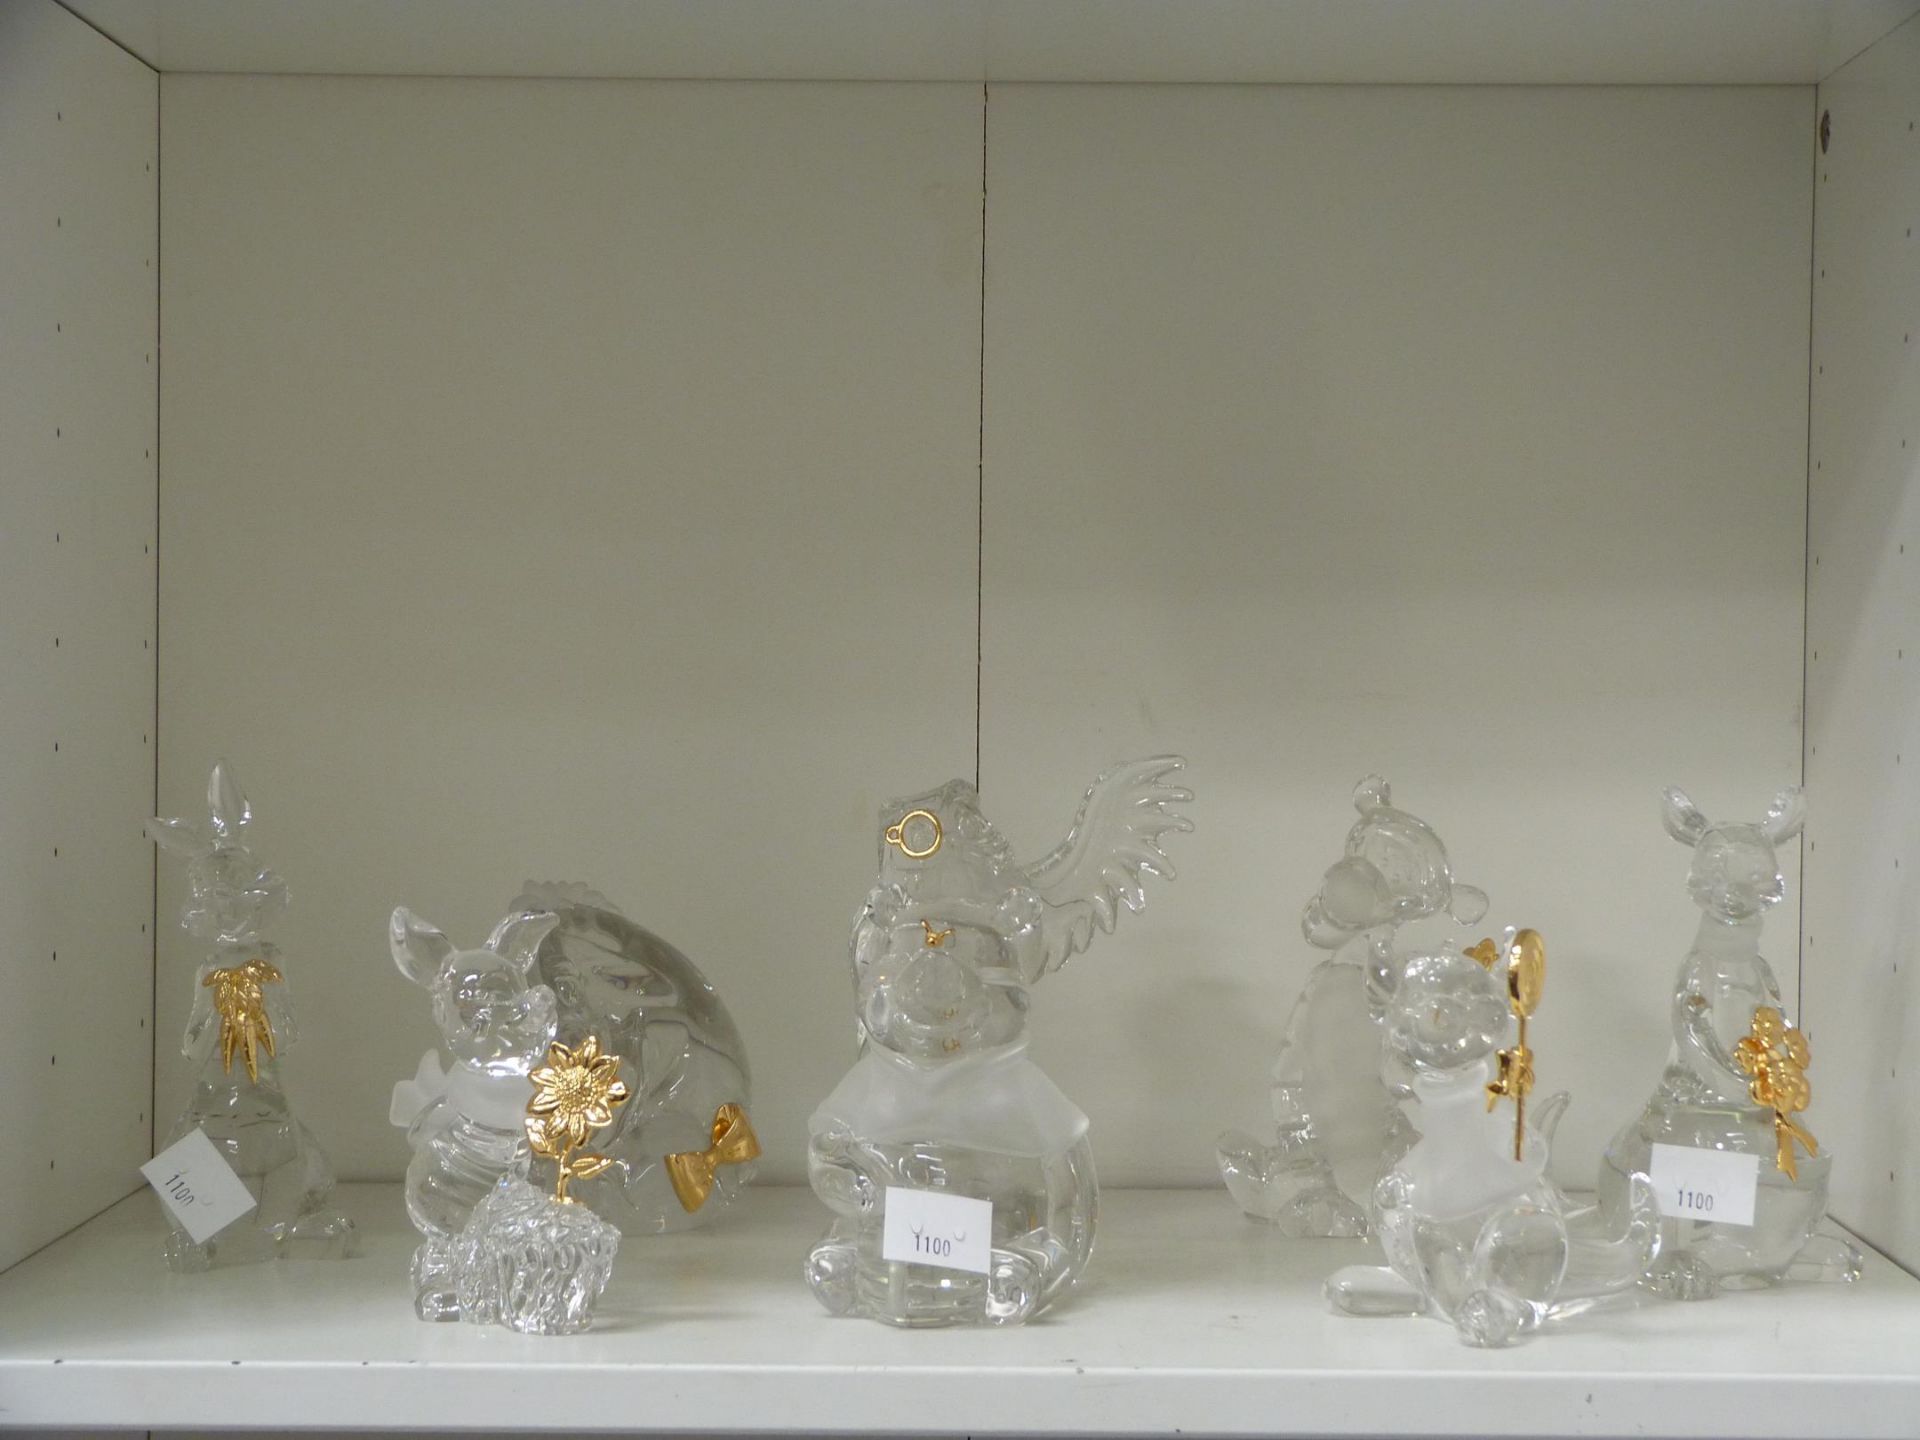 A shelf to contain eight full lead Crystal 'Lenox' Disney Figurines based on 'Winnie the Pooh'